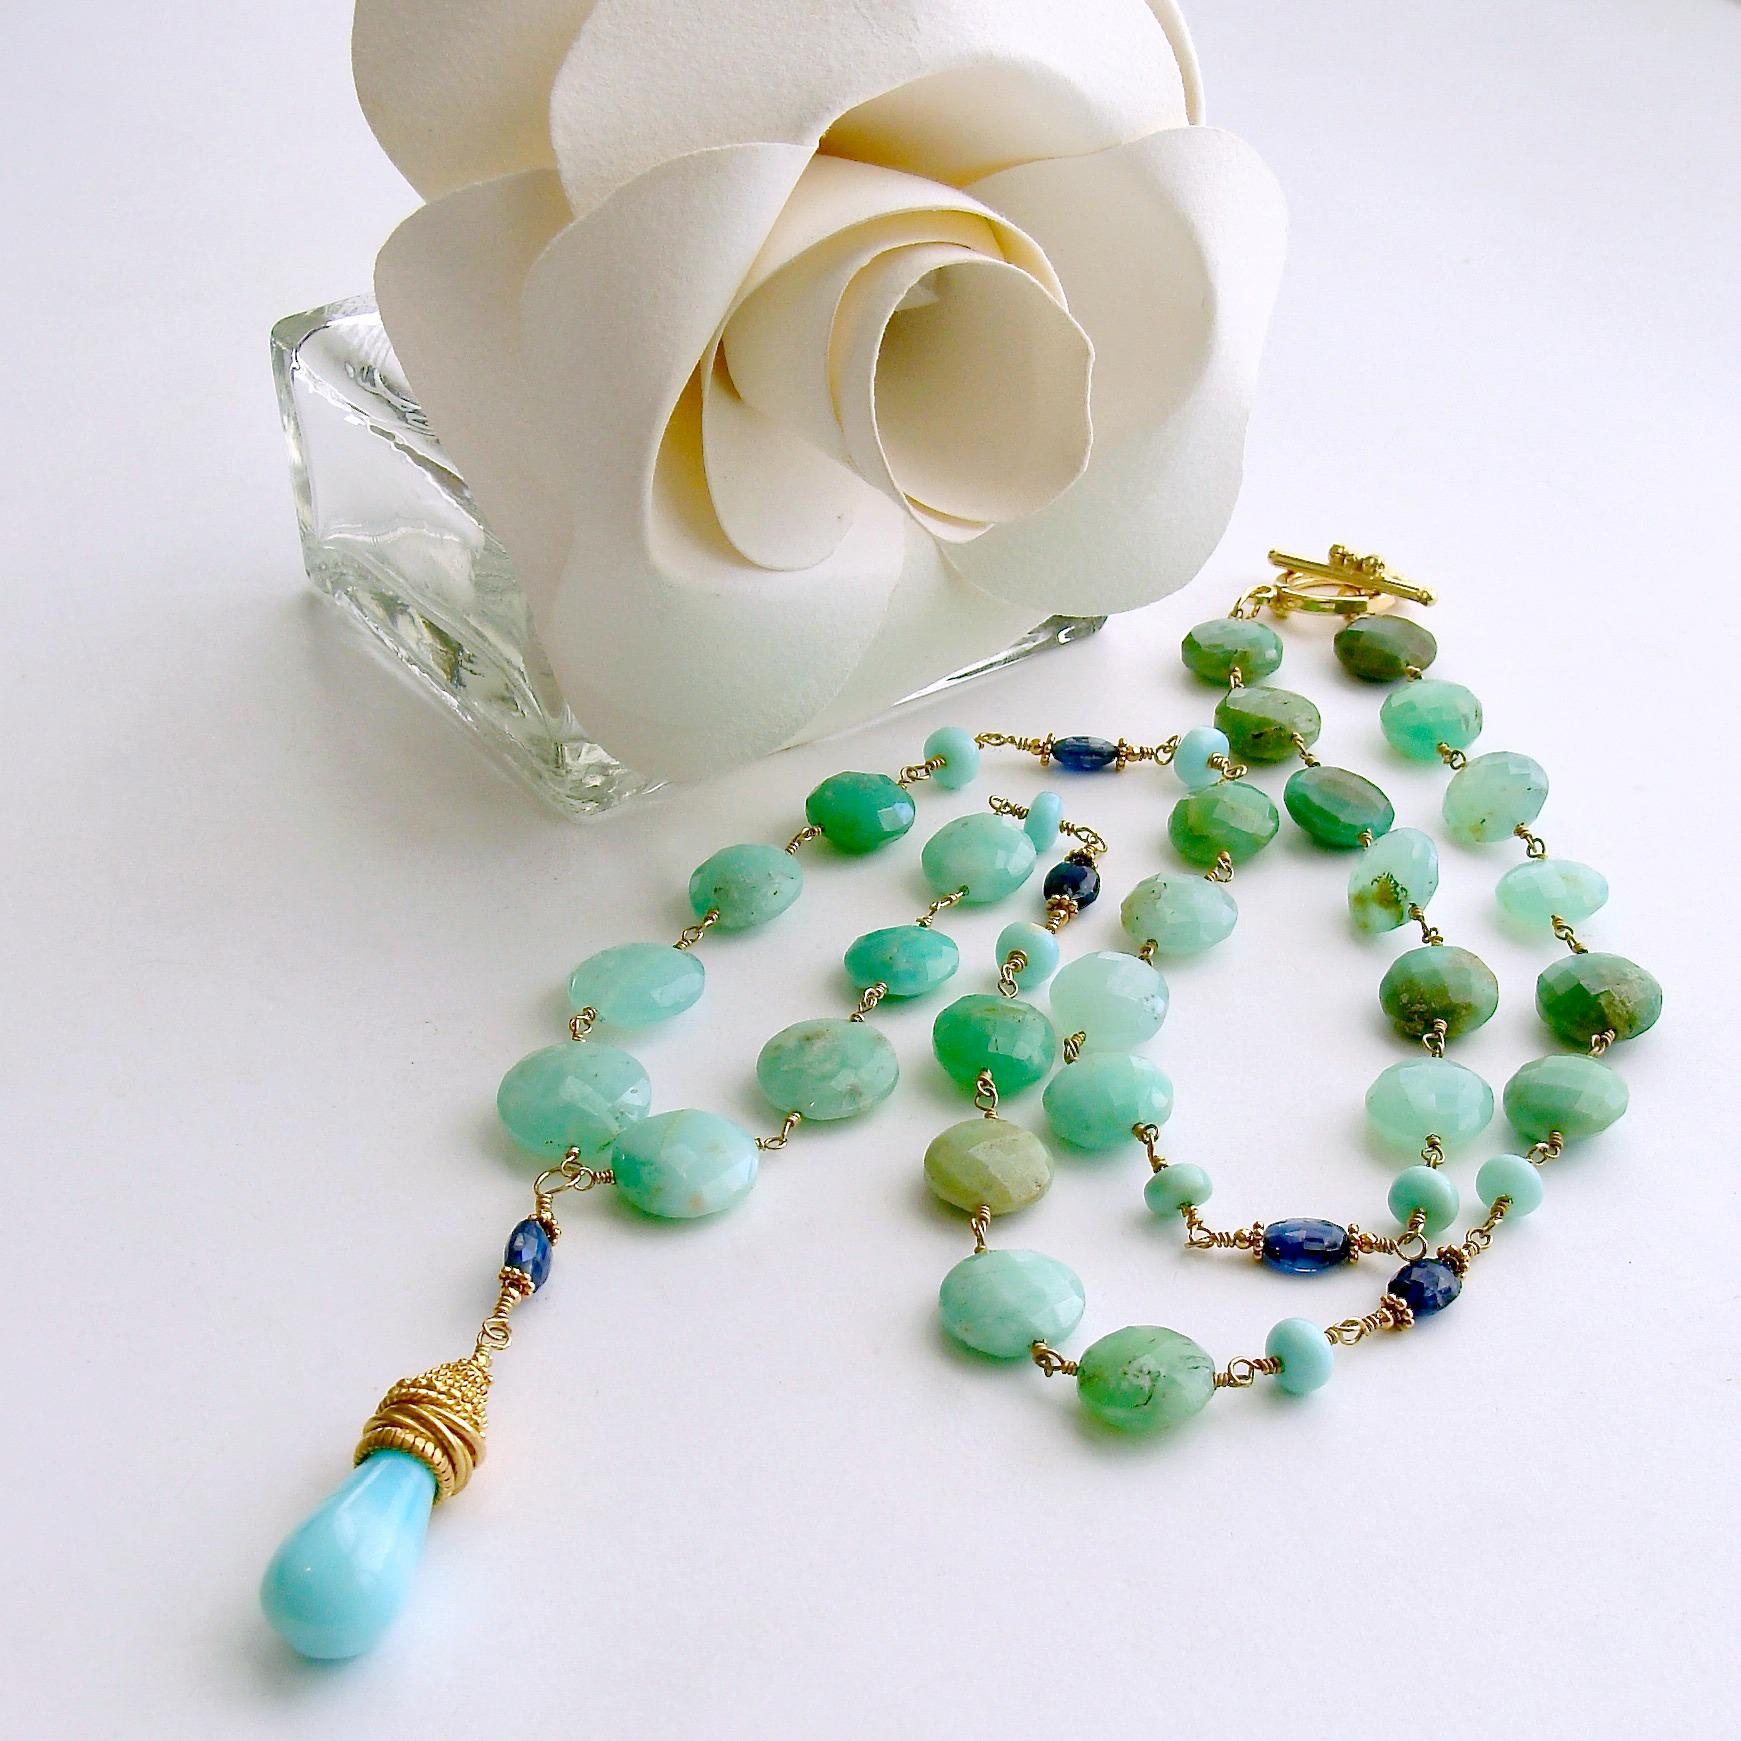 Oval Cut Chrysoprase Coins Peruvian Blue Opal Kyanite Necklace, Molly II Necklace